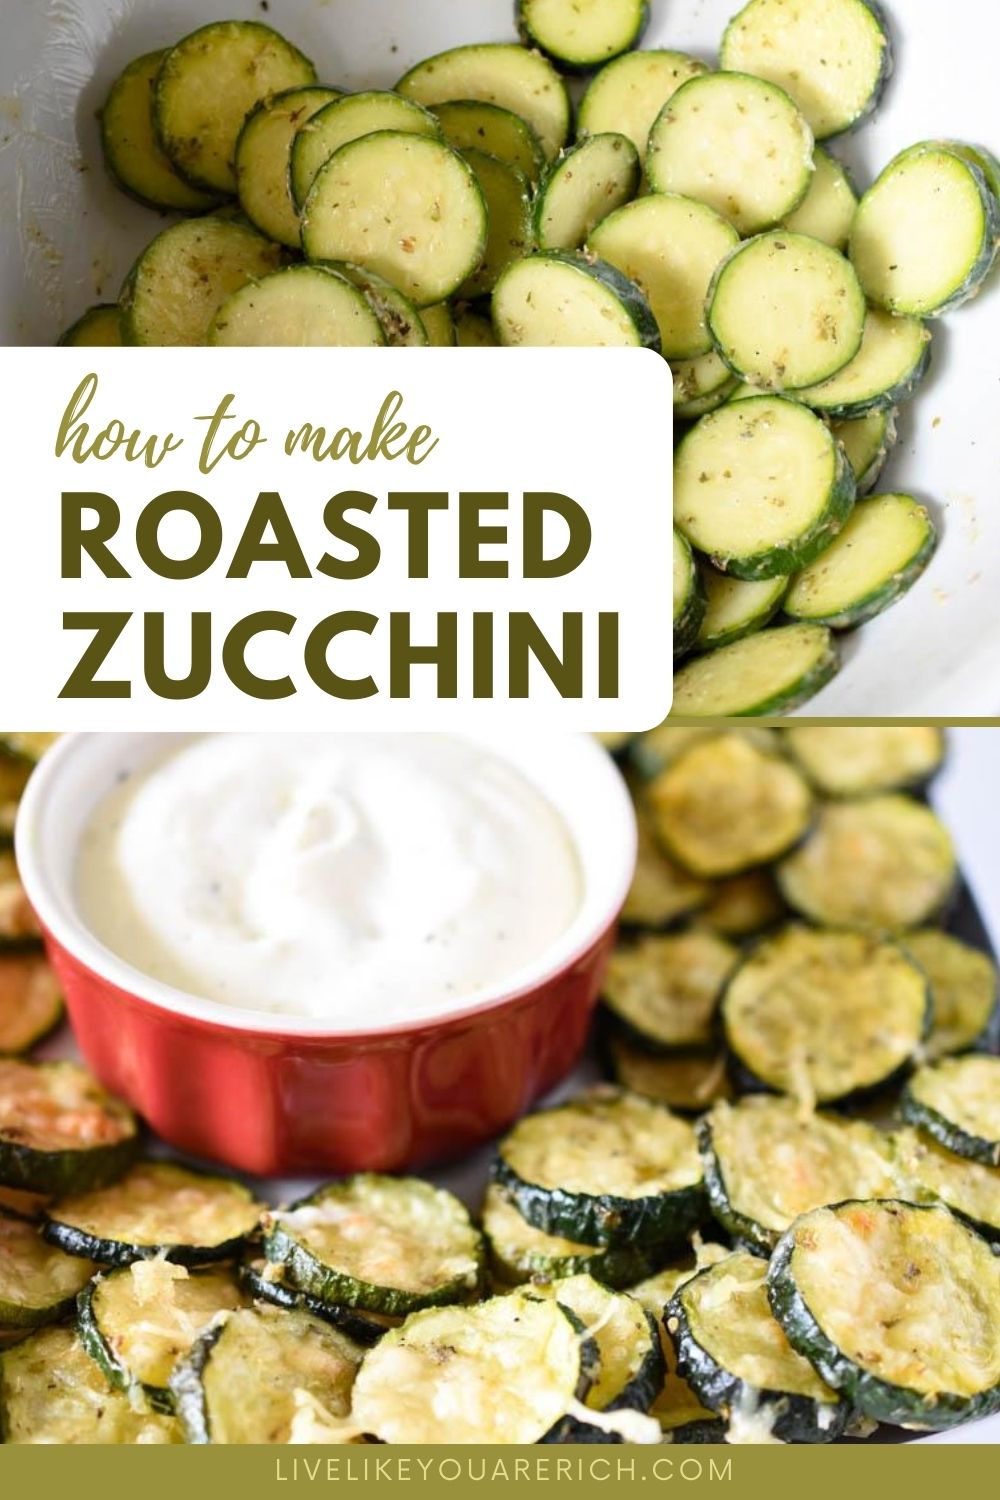 I love fresh veggies that can be seasoned, prepped, and cooked easily for dinner or snacking. Zucchini is one of those veggies. Slicing it up and tossing it in herbs, some olive oil, and then sprinkling parmesan over it makes a delicious and vitamin-rich side dish or snack! This is one of my favorite zucchini recipes. I make it quite often. My kids will even devour these—and that's saying a lot.